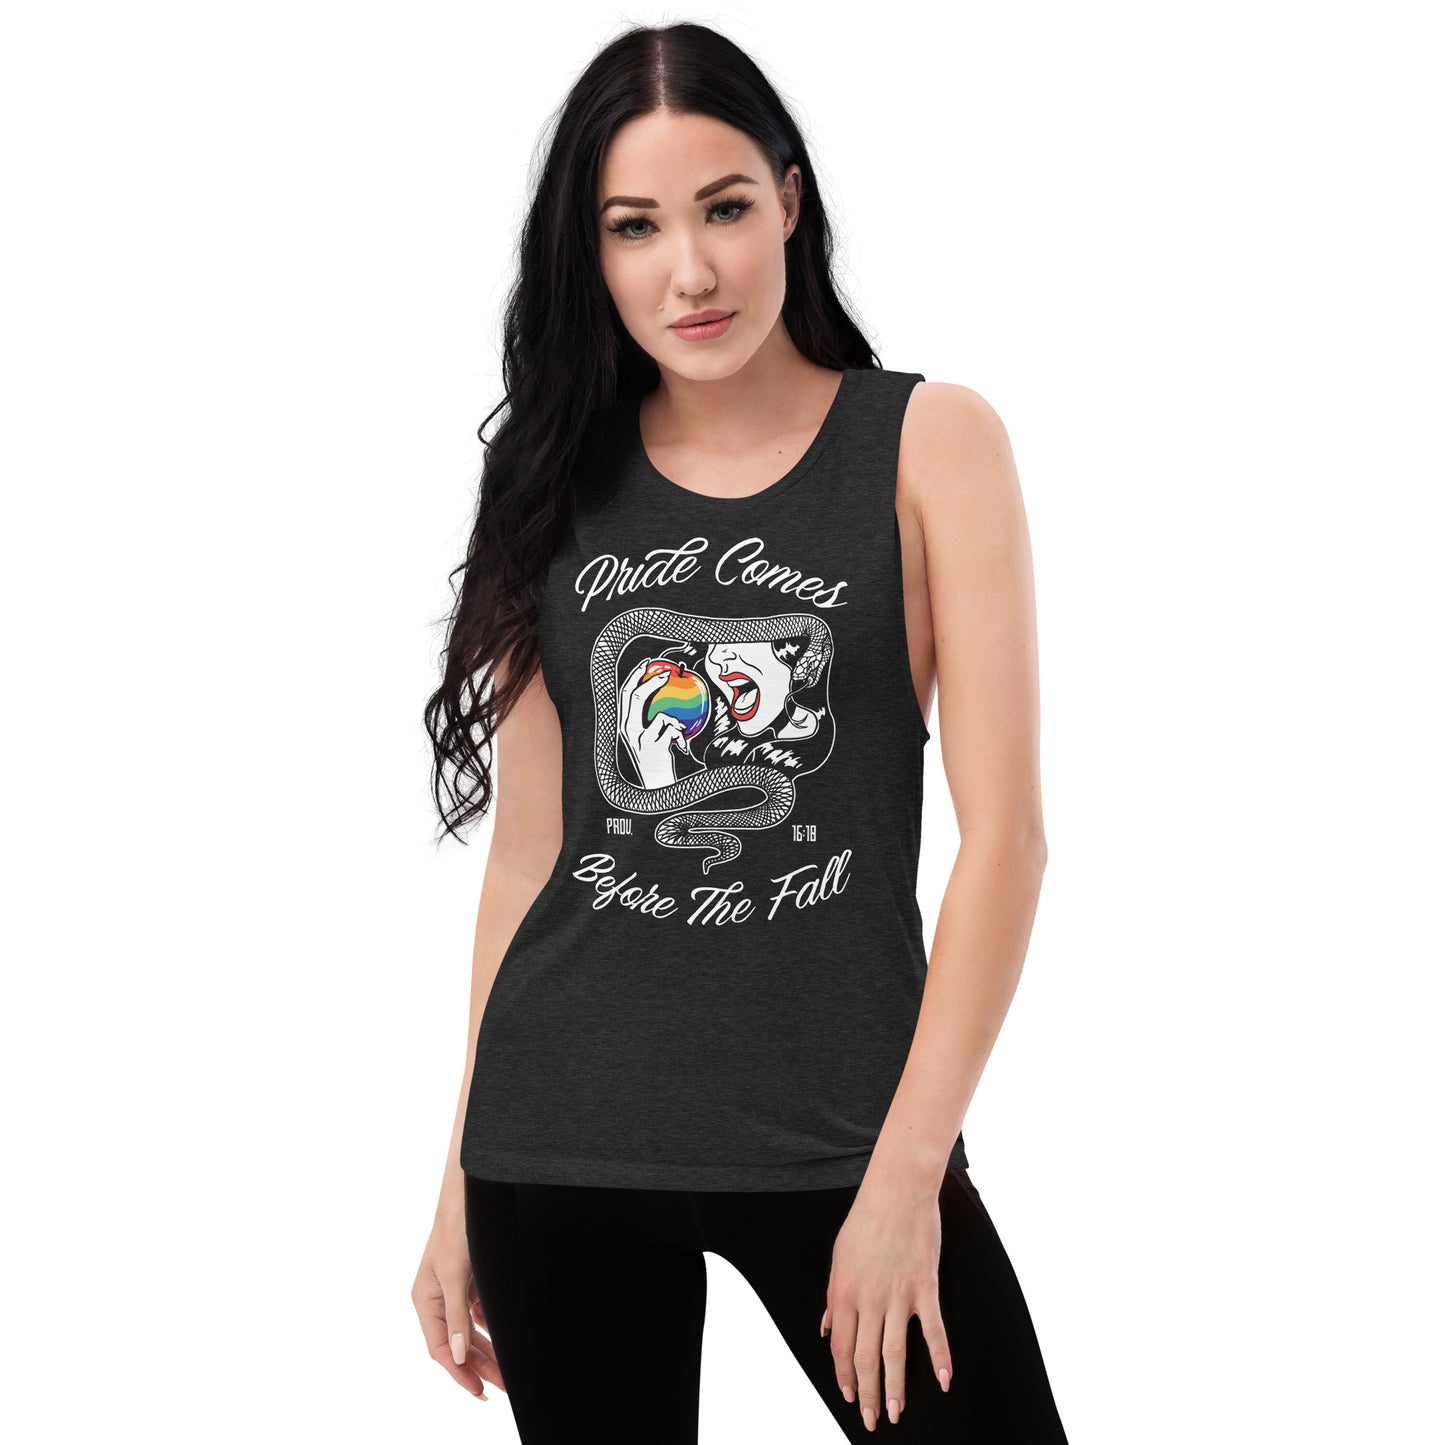 "Pride Comes Before The Fall." (Eve) - Women's Muscle Tank